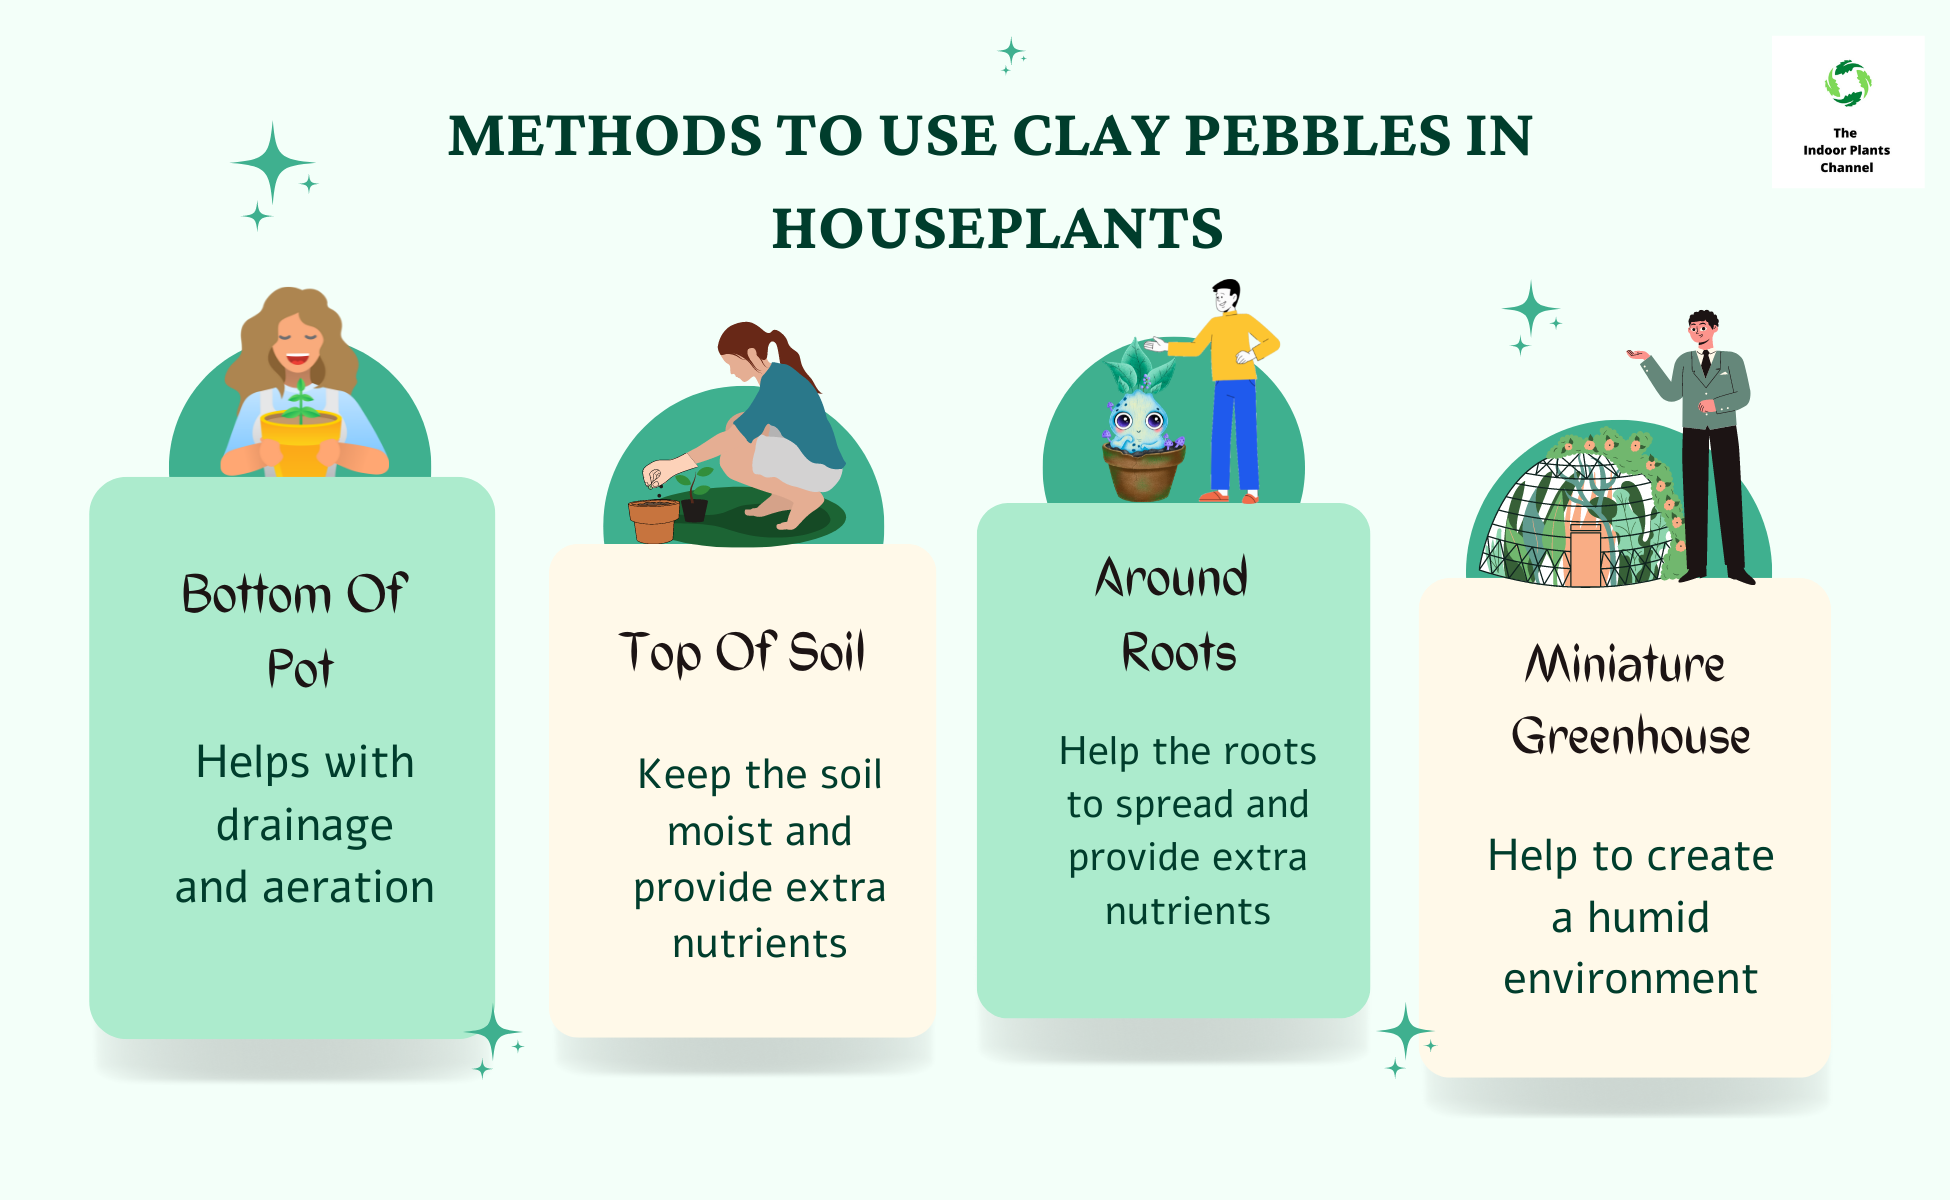 4 Methods to Use Clay Pebbles In Houseplants